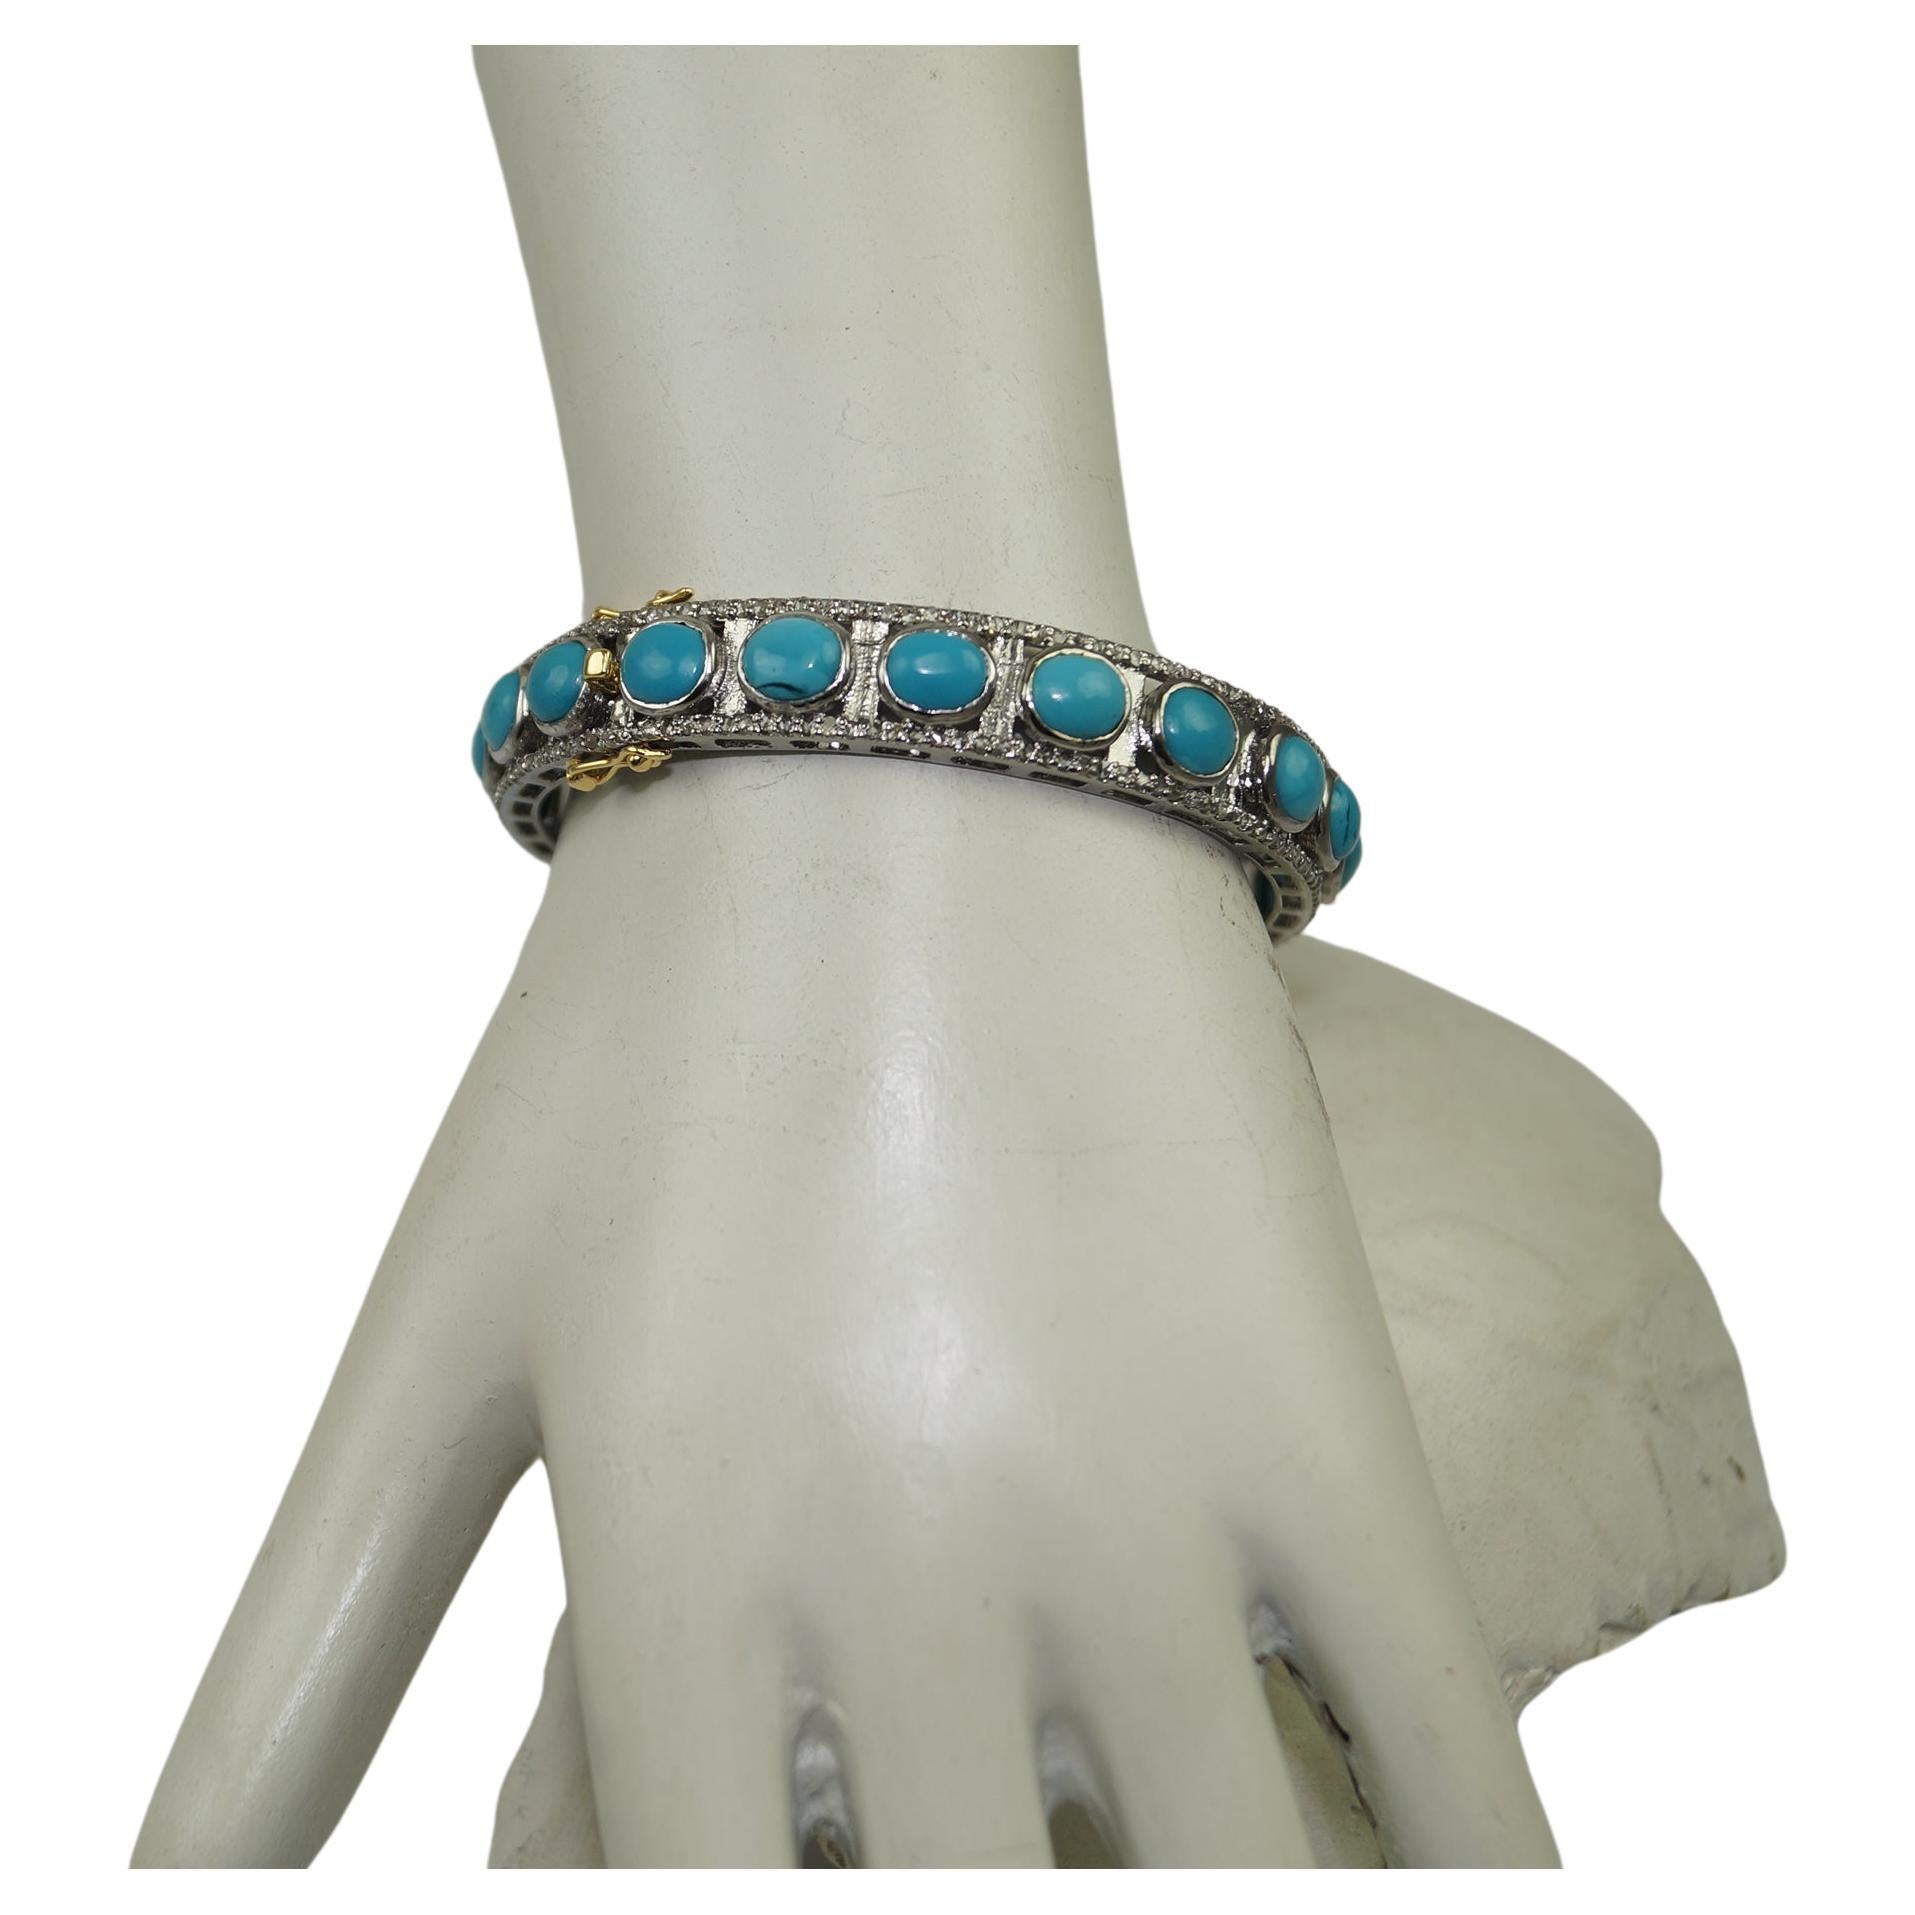 Natural pave diamond Turquoise oxidized sterling silver hinged bracelet